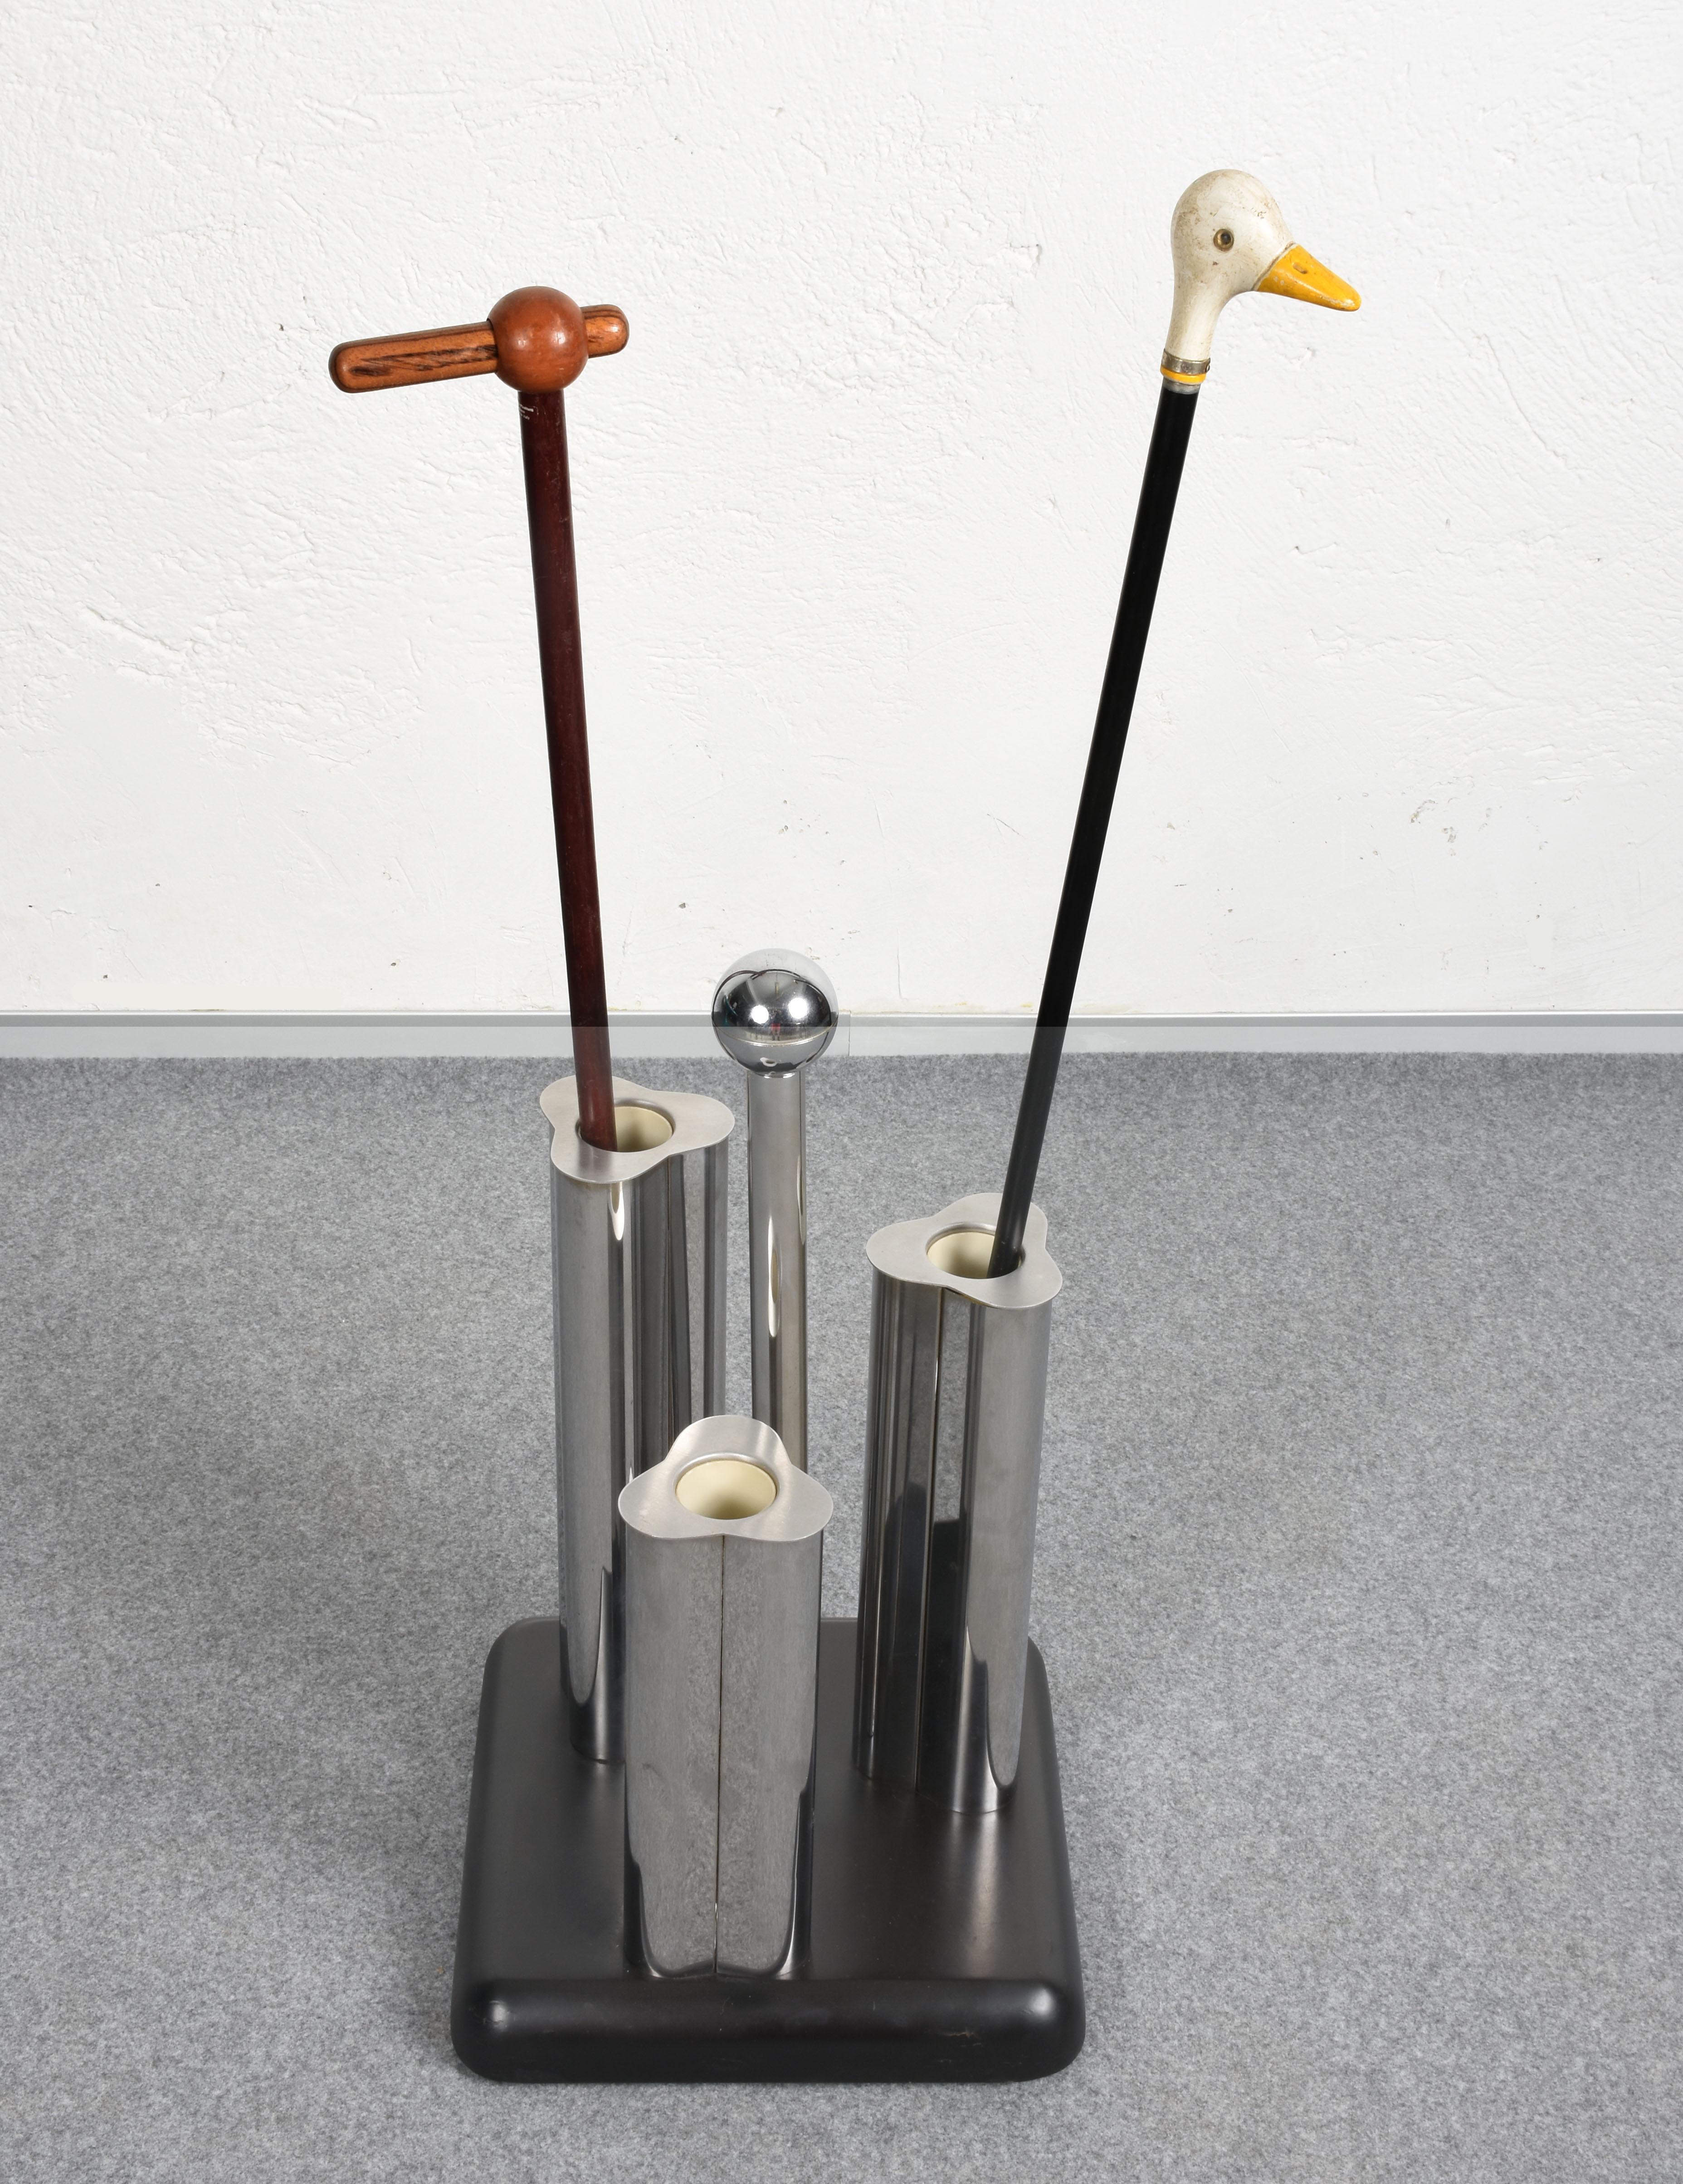 Umbrella Stand Black, Italian, Lacquered Wood and Metal, Italy, 1970s Vintage For Sale 4